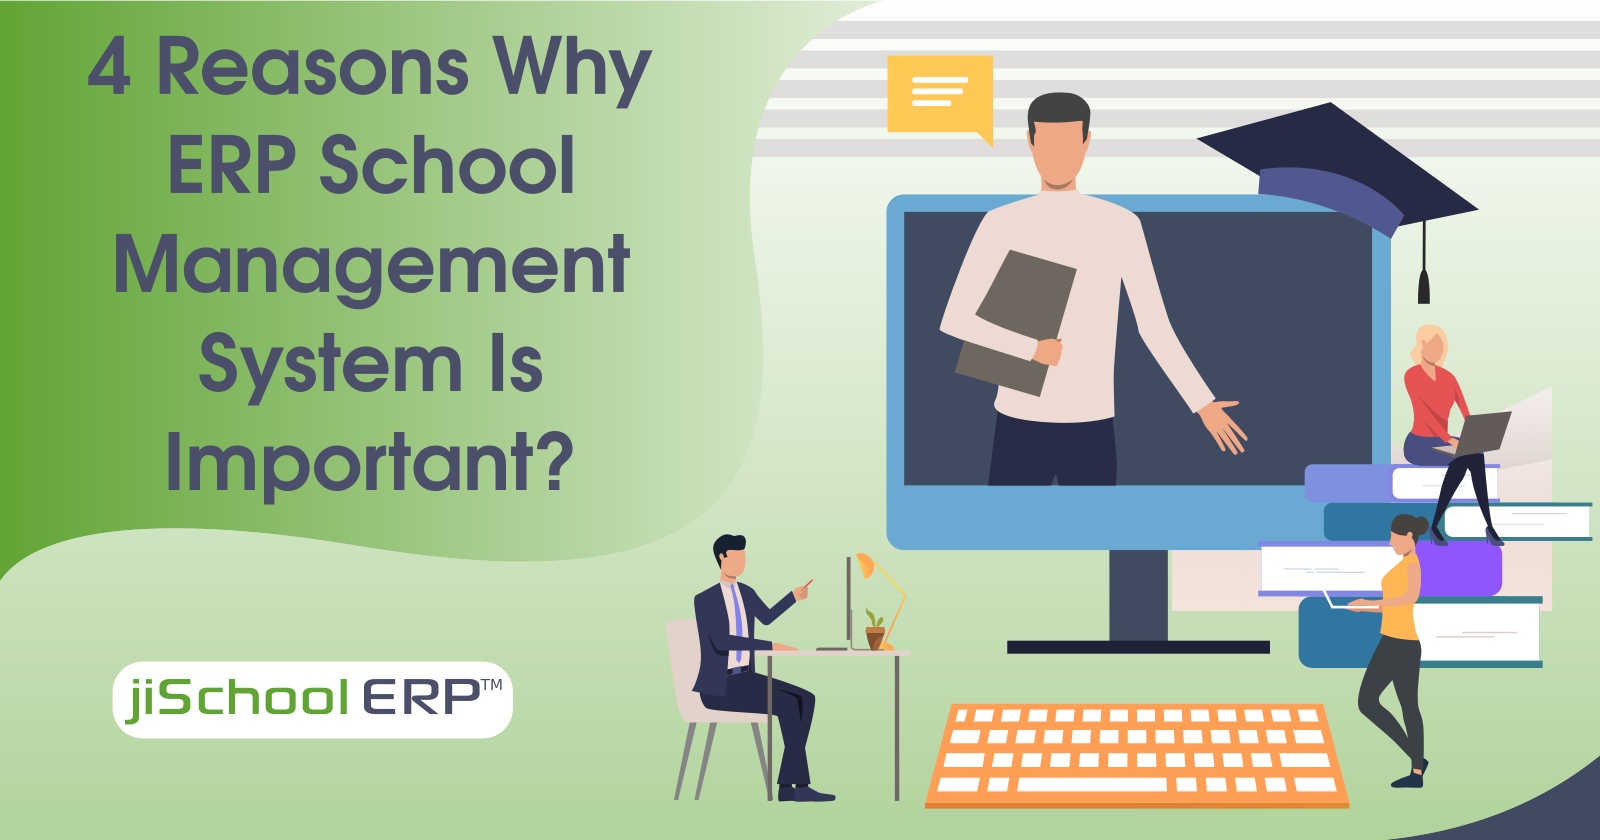 4 Reasons Why ERP School Management System Is Important?